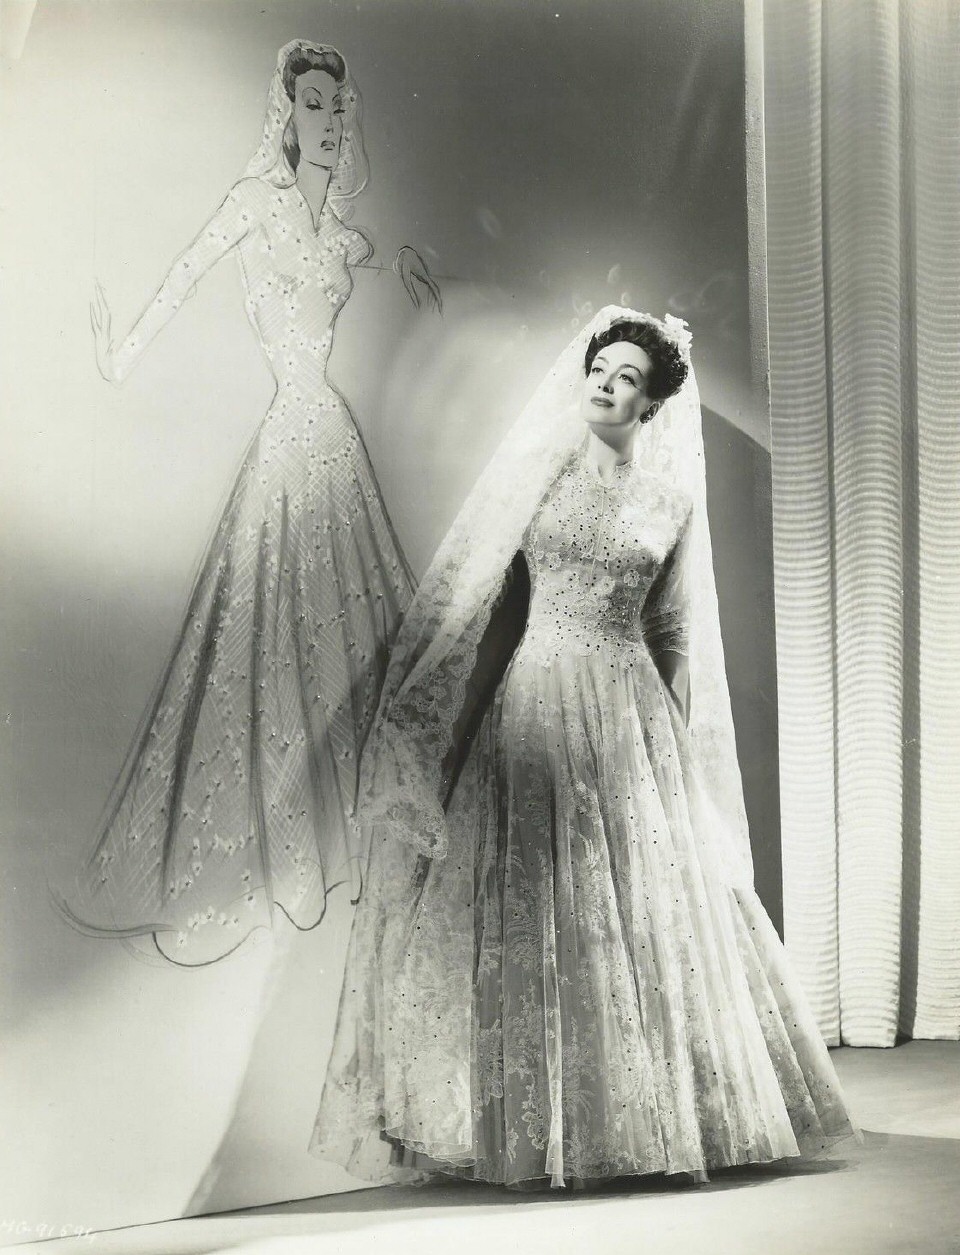 1942 publicity for 'Reunion in France' with costume and sketch by Irene.